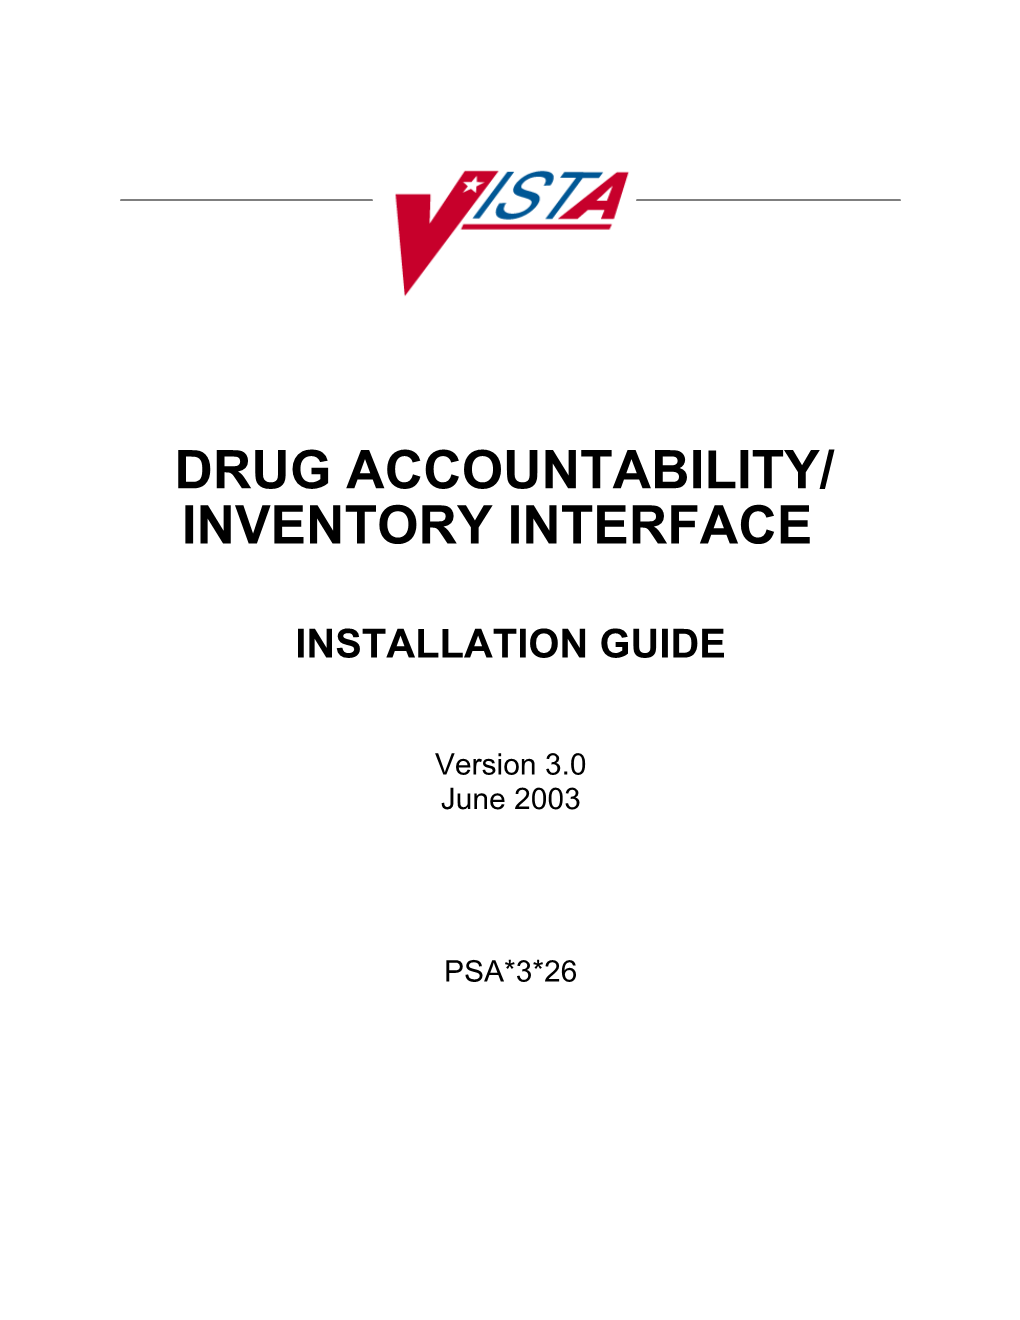 DRUG ACCOUNTABILITY/ INVENTORY Interface